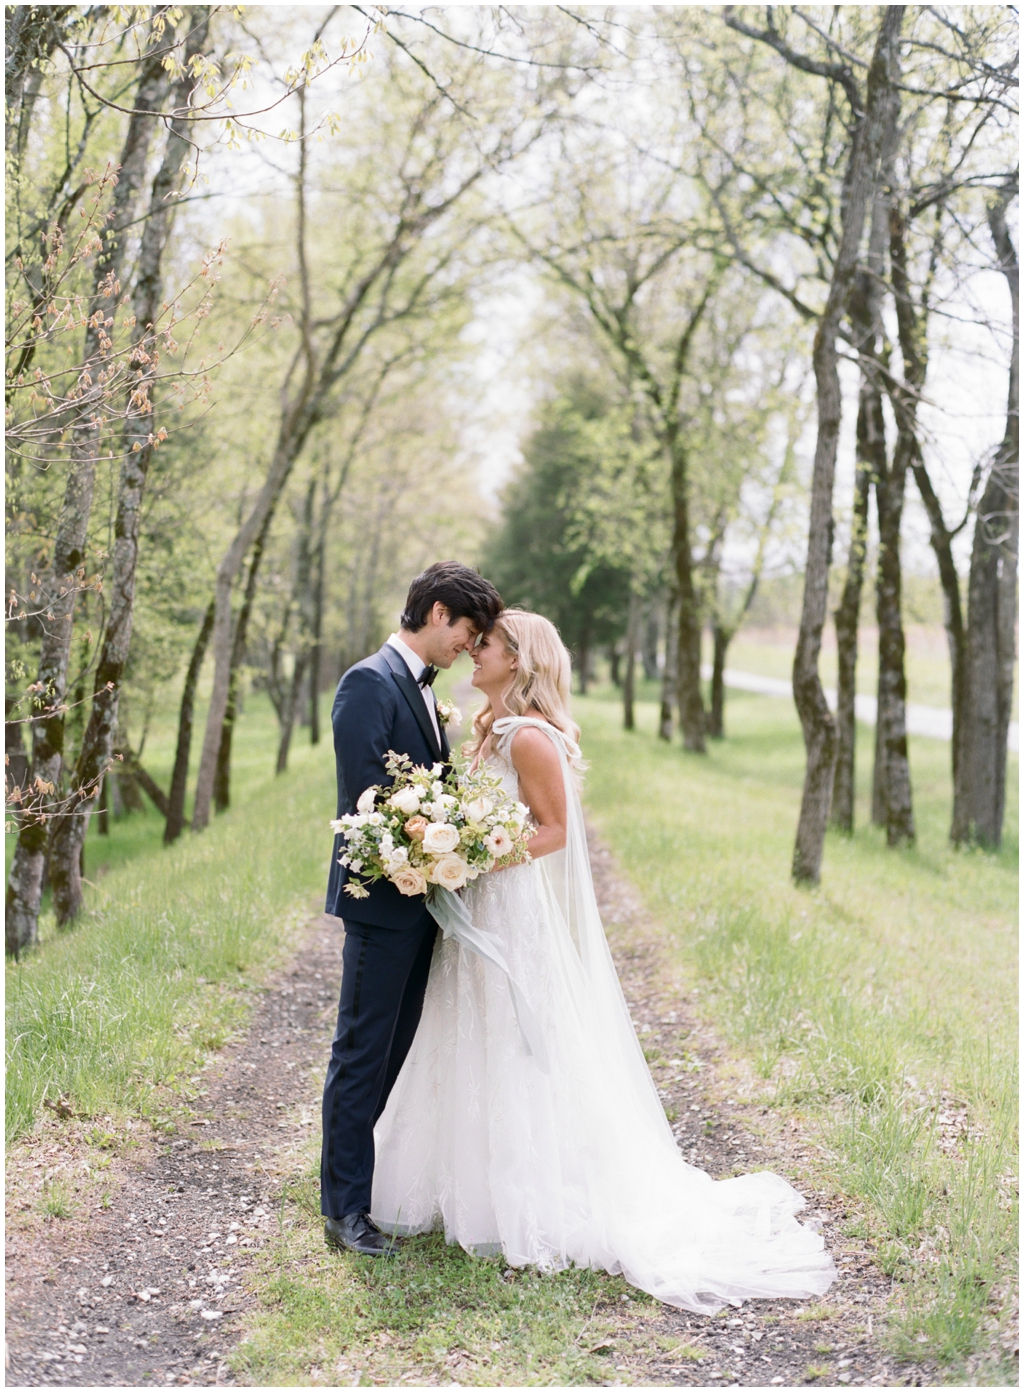 Soft beautiful bride and groom portraits at Marblegate Farm